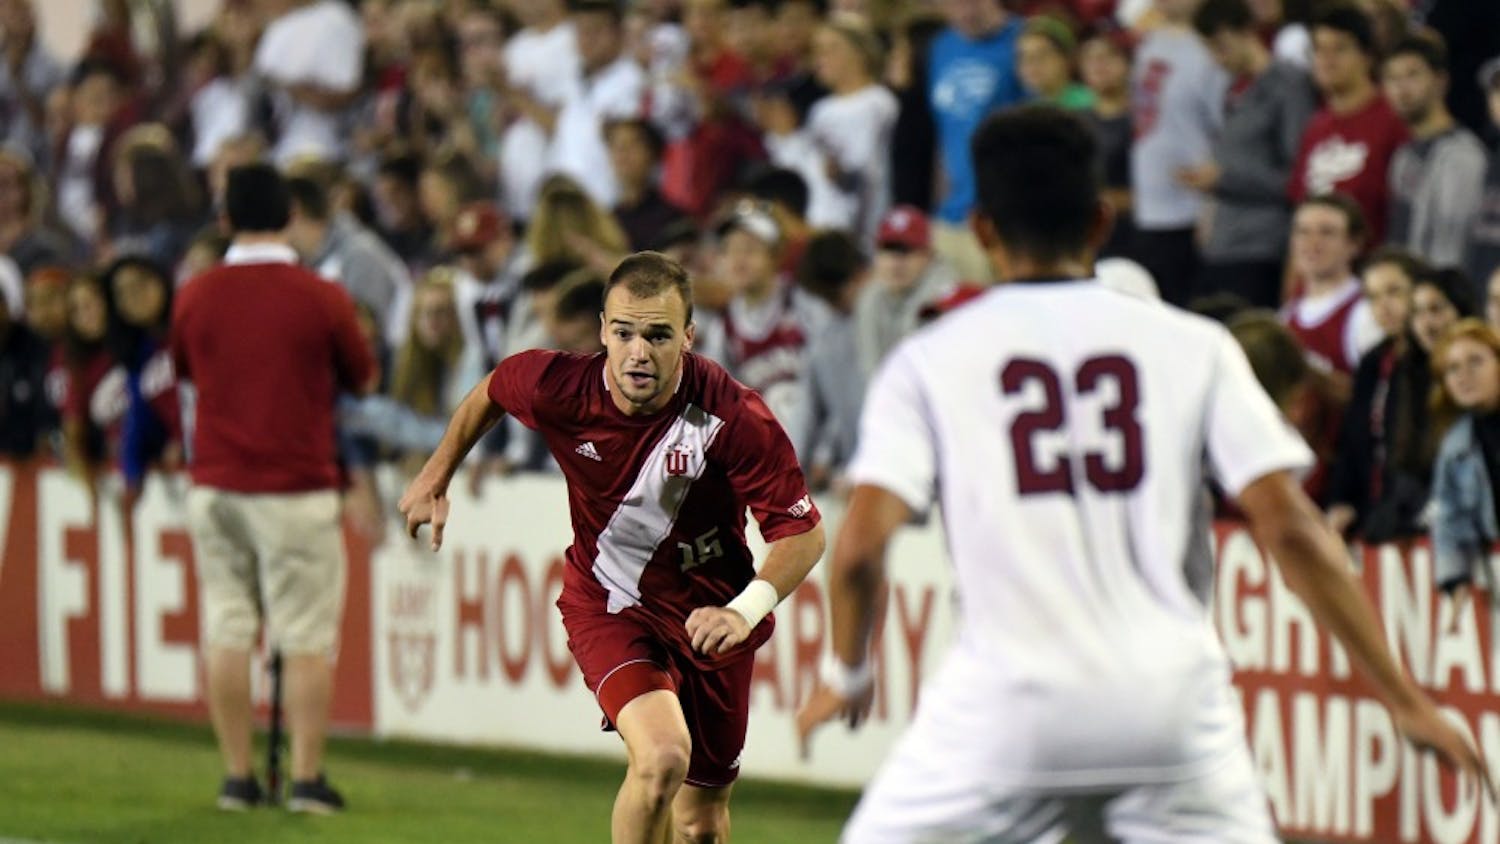 Then-junior defender Andrew Gutman runs toward the Santa Clara goal on Sept. 30, 2017, at Bill Armstrong Stadium. Gutman was one of two IU players to play the full 90 minutes against North Carolina on Sunday.&nbsp;